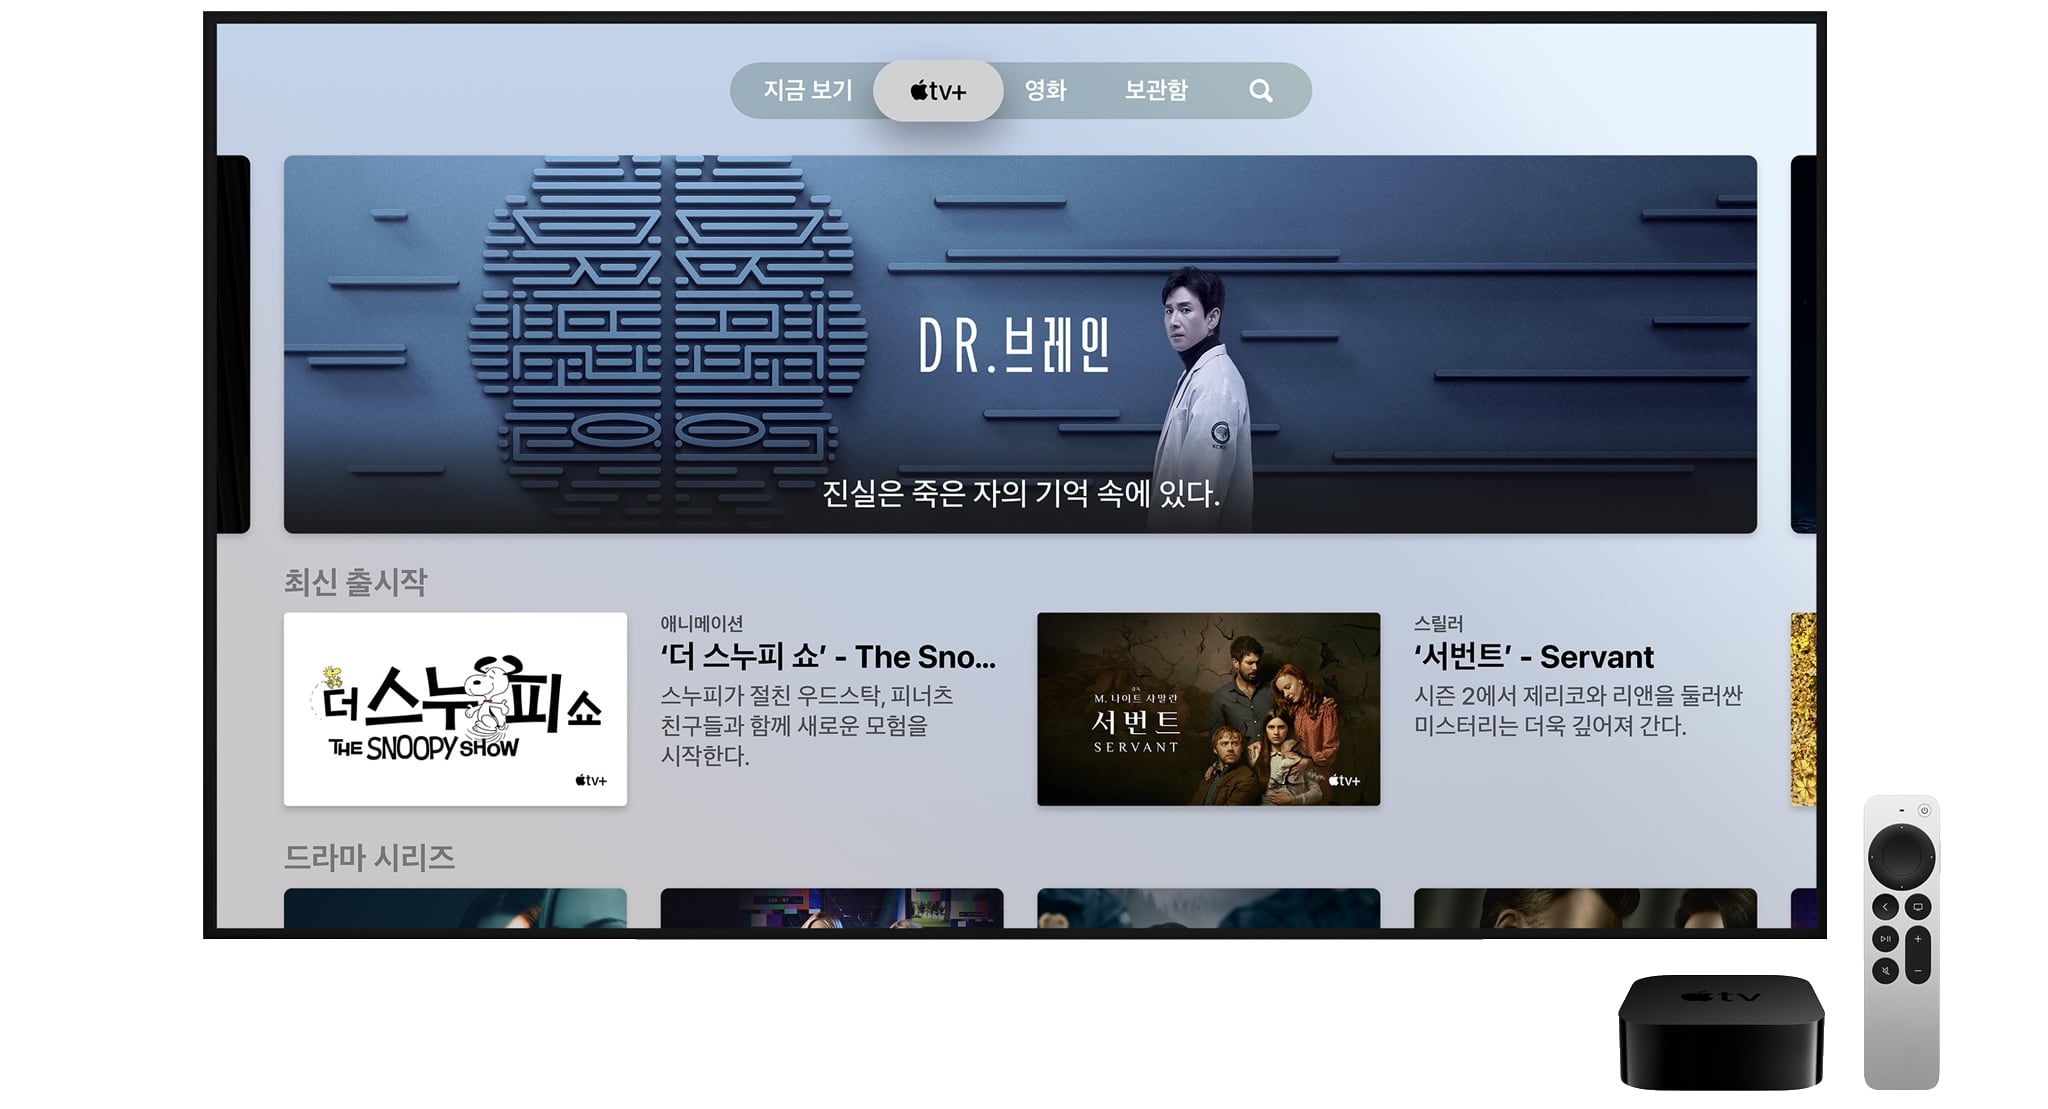 Apple's marketing image showing Apple TV 4K with the Korean science fiction thriller "Dr. Brain" displayed in the TV app